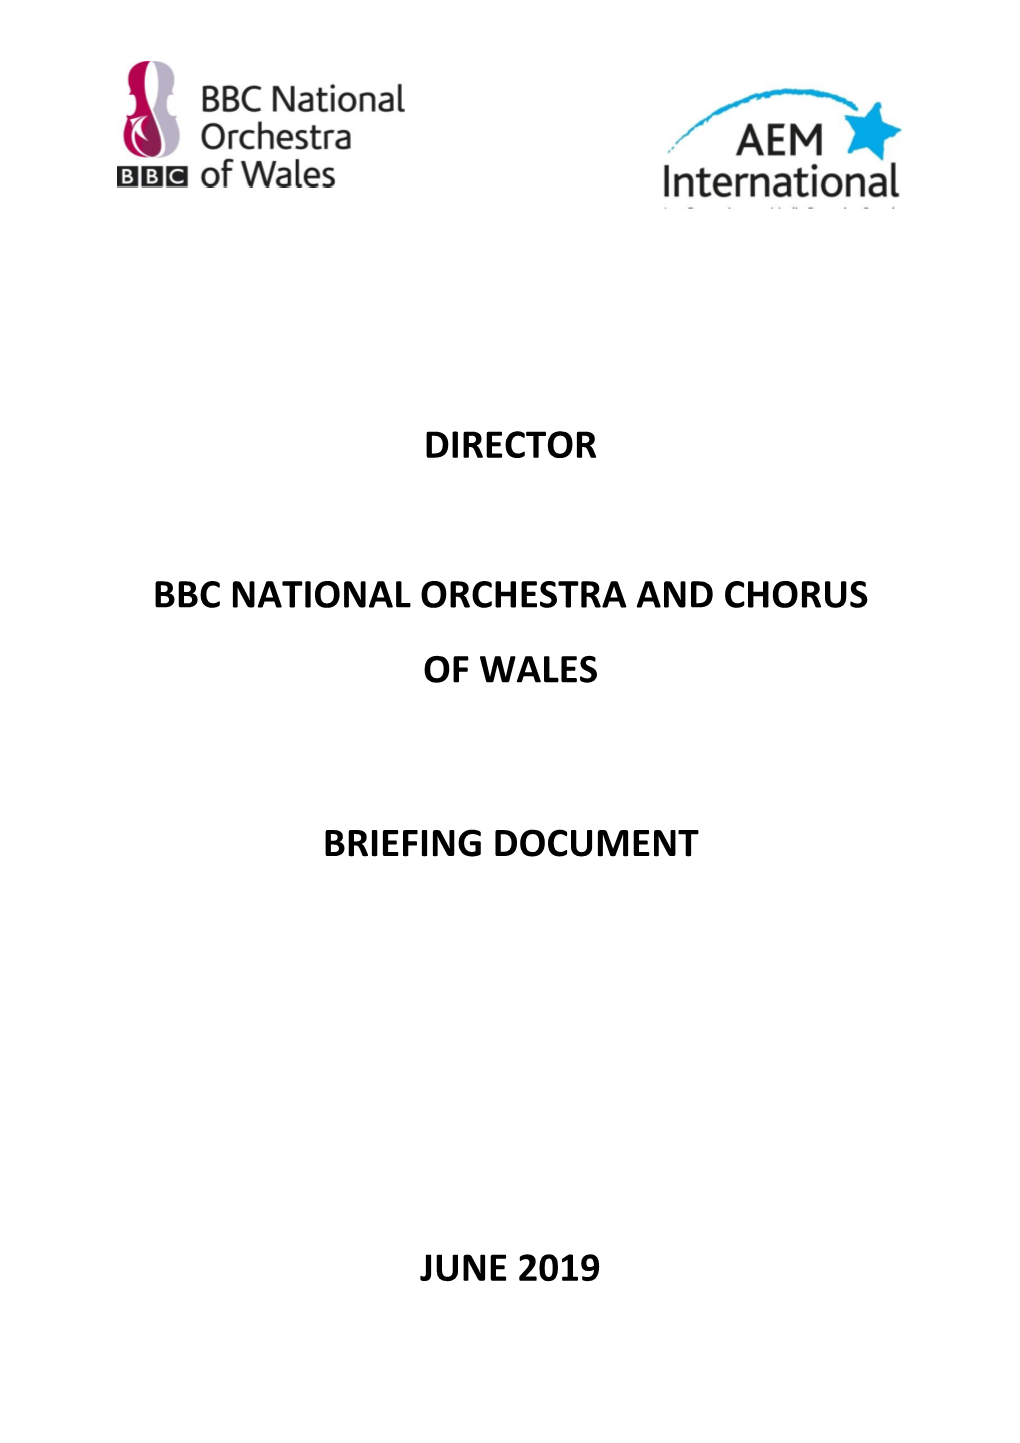 Director Bbc National Orchestra and Chorus of Wales Briefing Document June 2019